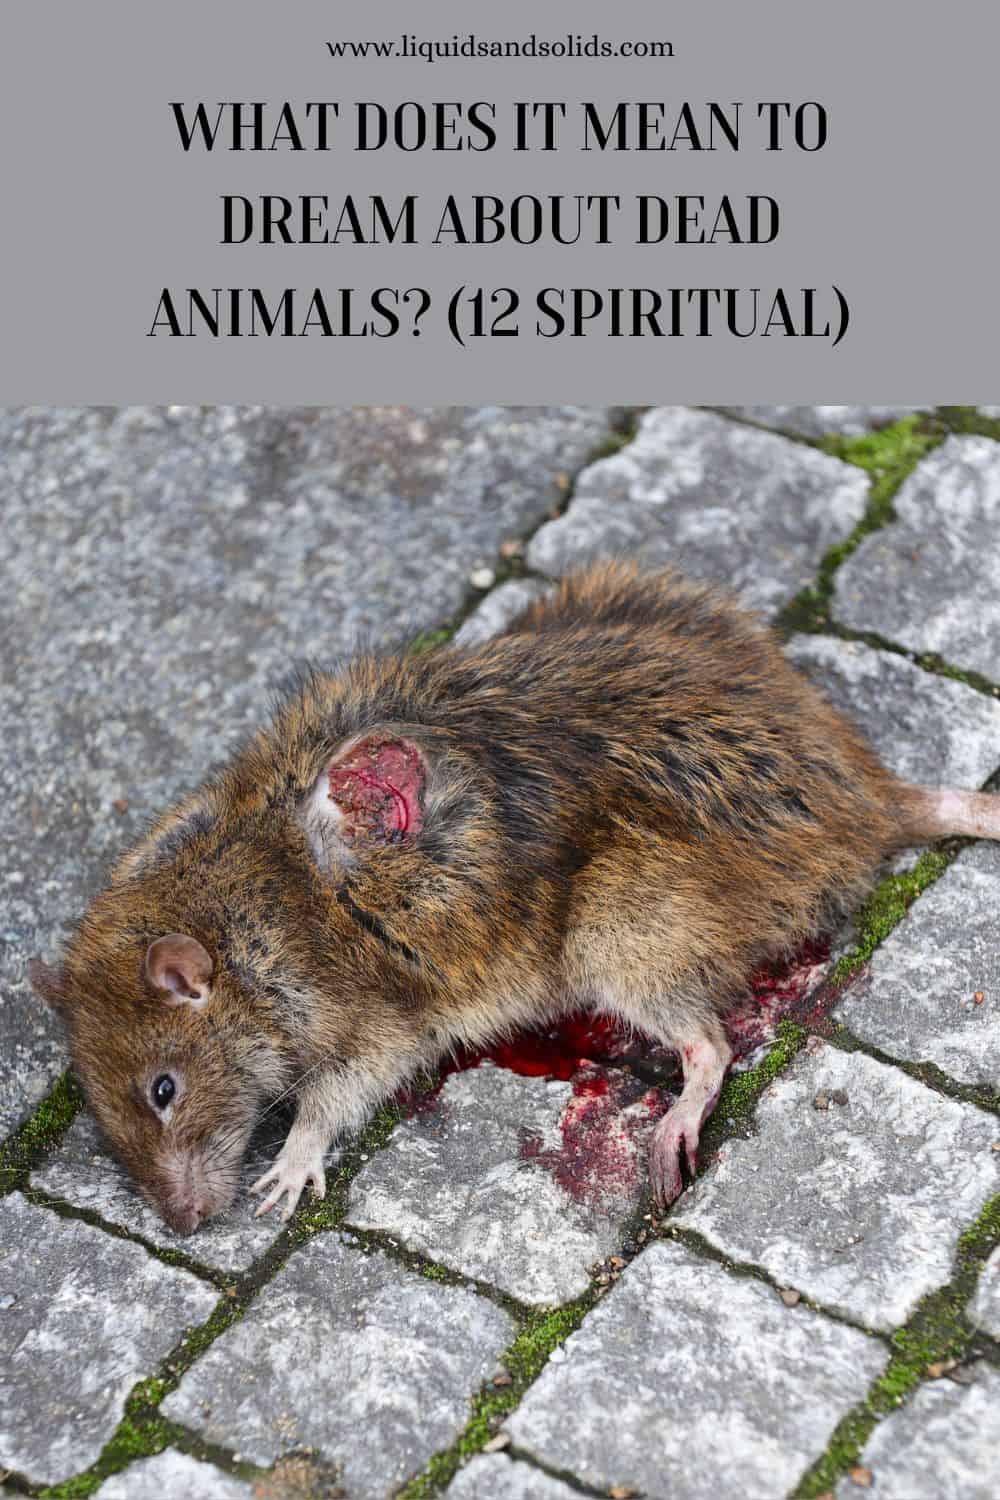  Rêver d'animaux morts (12 significations spirituelles)